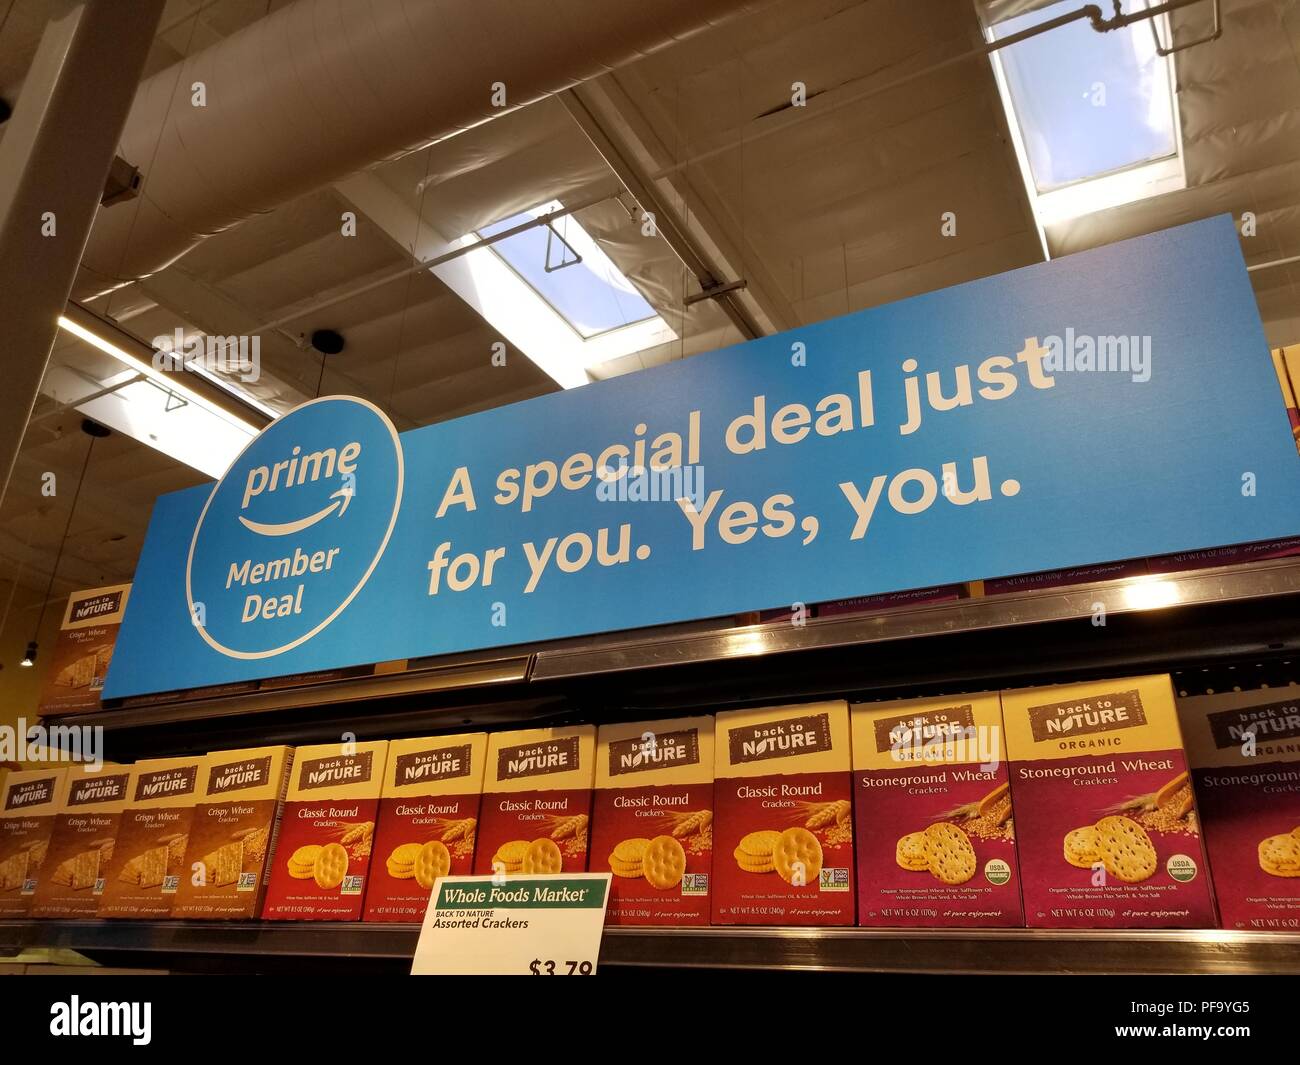 At a Whole Foods Market grocery store in San Ramon, California, signage advertises new discounts for members of the Amazon Prime service from Amazon, which acquired Whole Foods Market in 2017, June, 2018. () Stock Photo